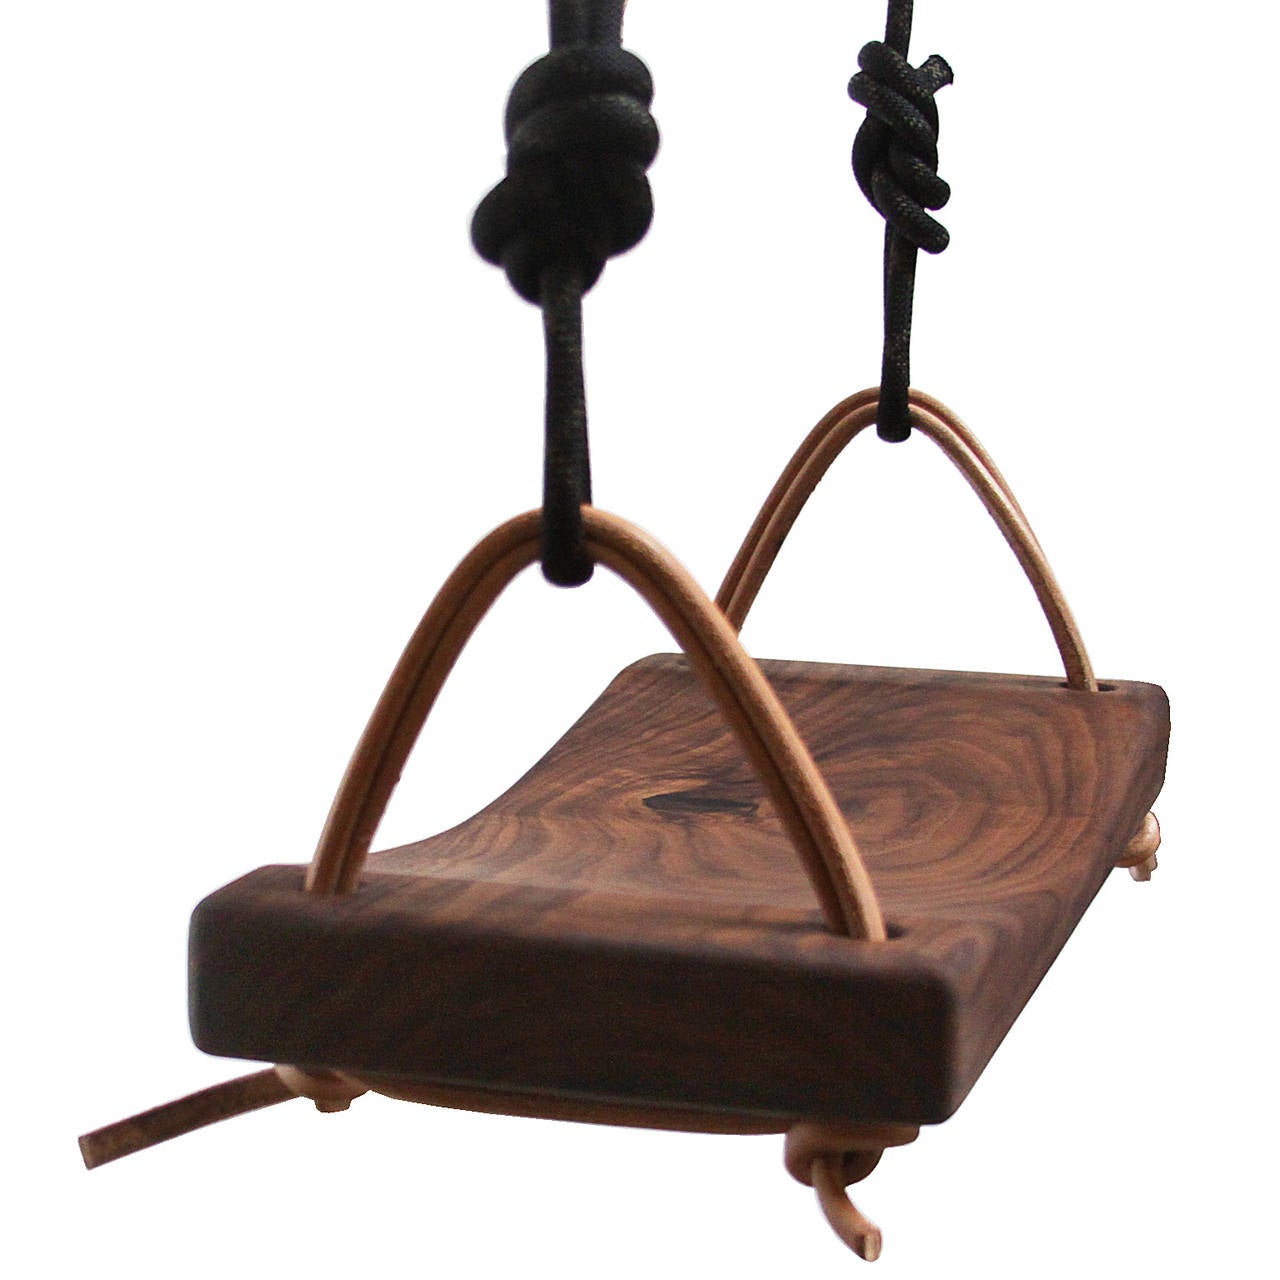 A unique solid walnut swing with leather and paracord strapping. This beautiful piece can be used indoors and is an elegant swing for a child or adult to play with.

WOOD OPTIONS:
Solid Walnut, Oak


FINISH OPTIONS:
Satin Lacquer in Natural,